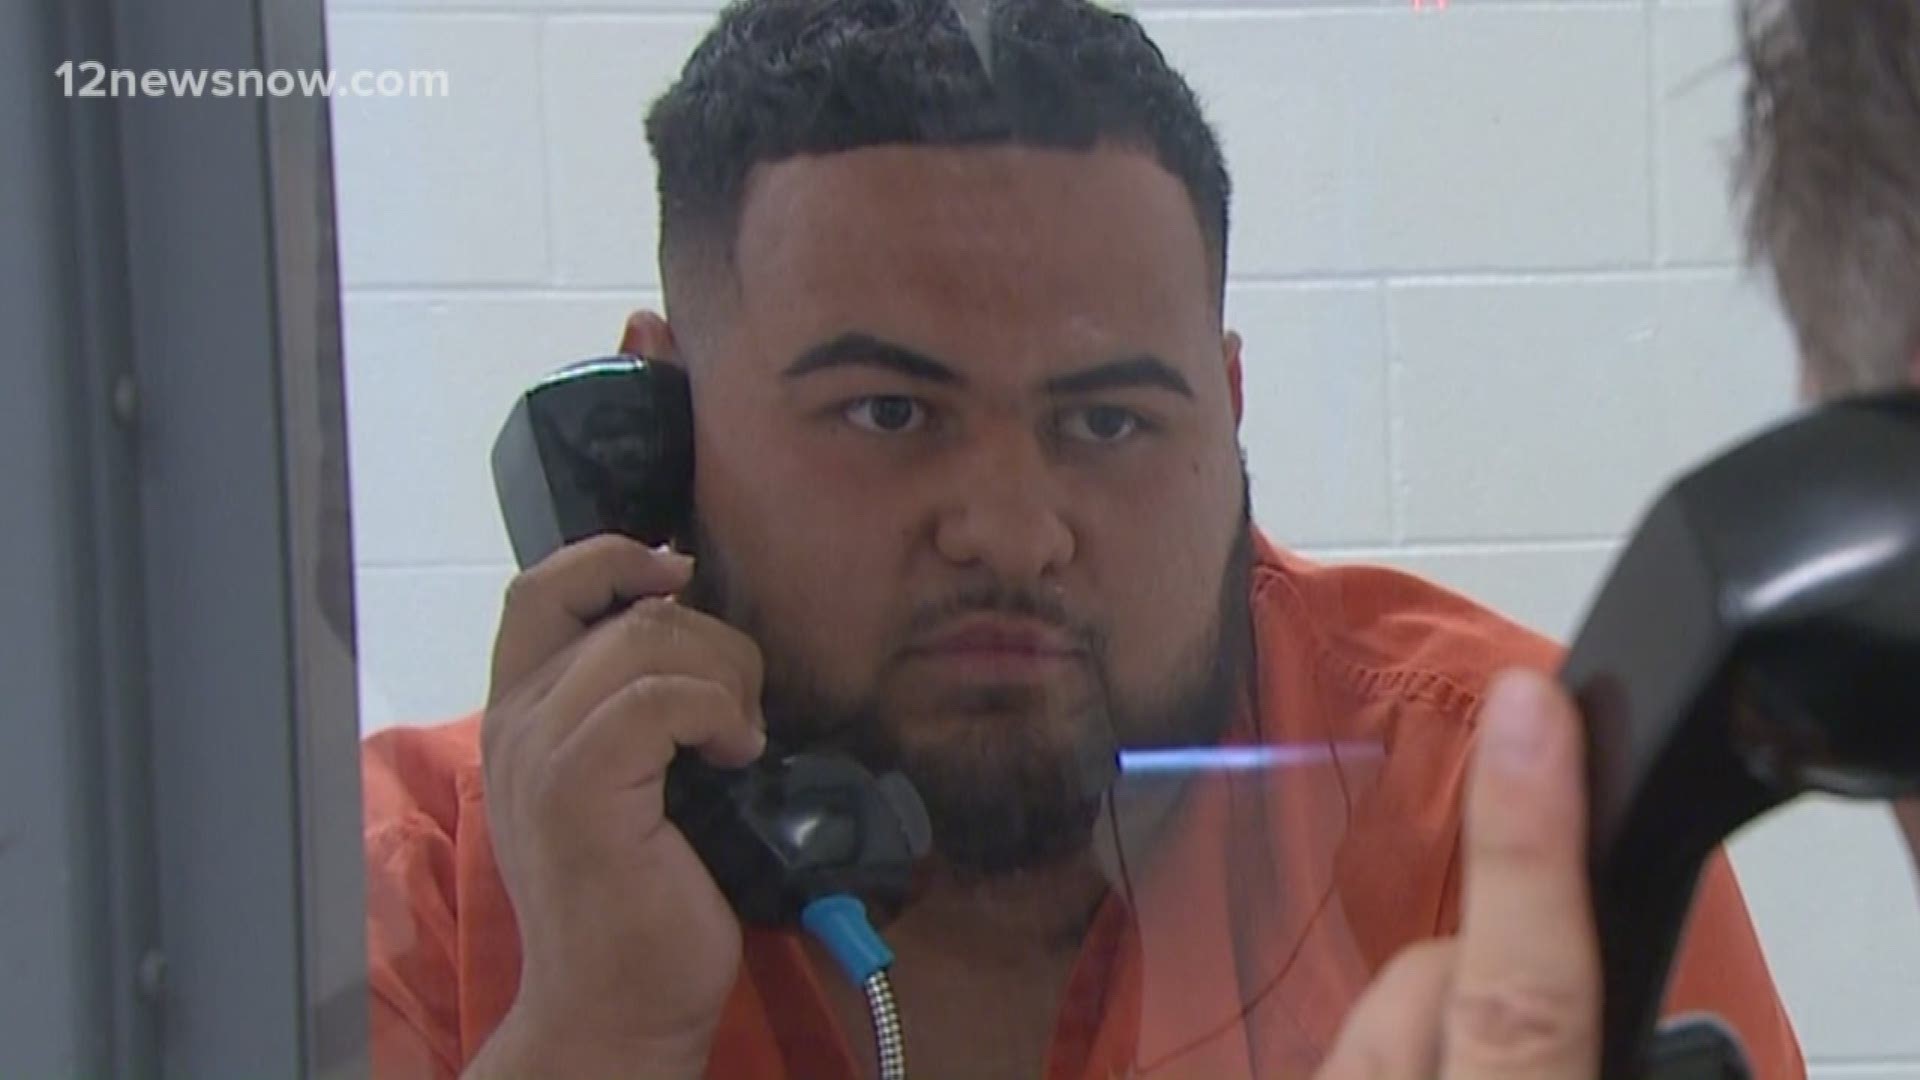 Deputies released Gonzales on Tuesday. He's maintained his innocence since the start.